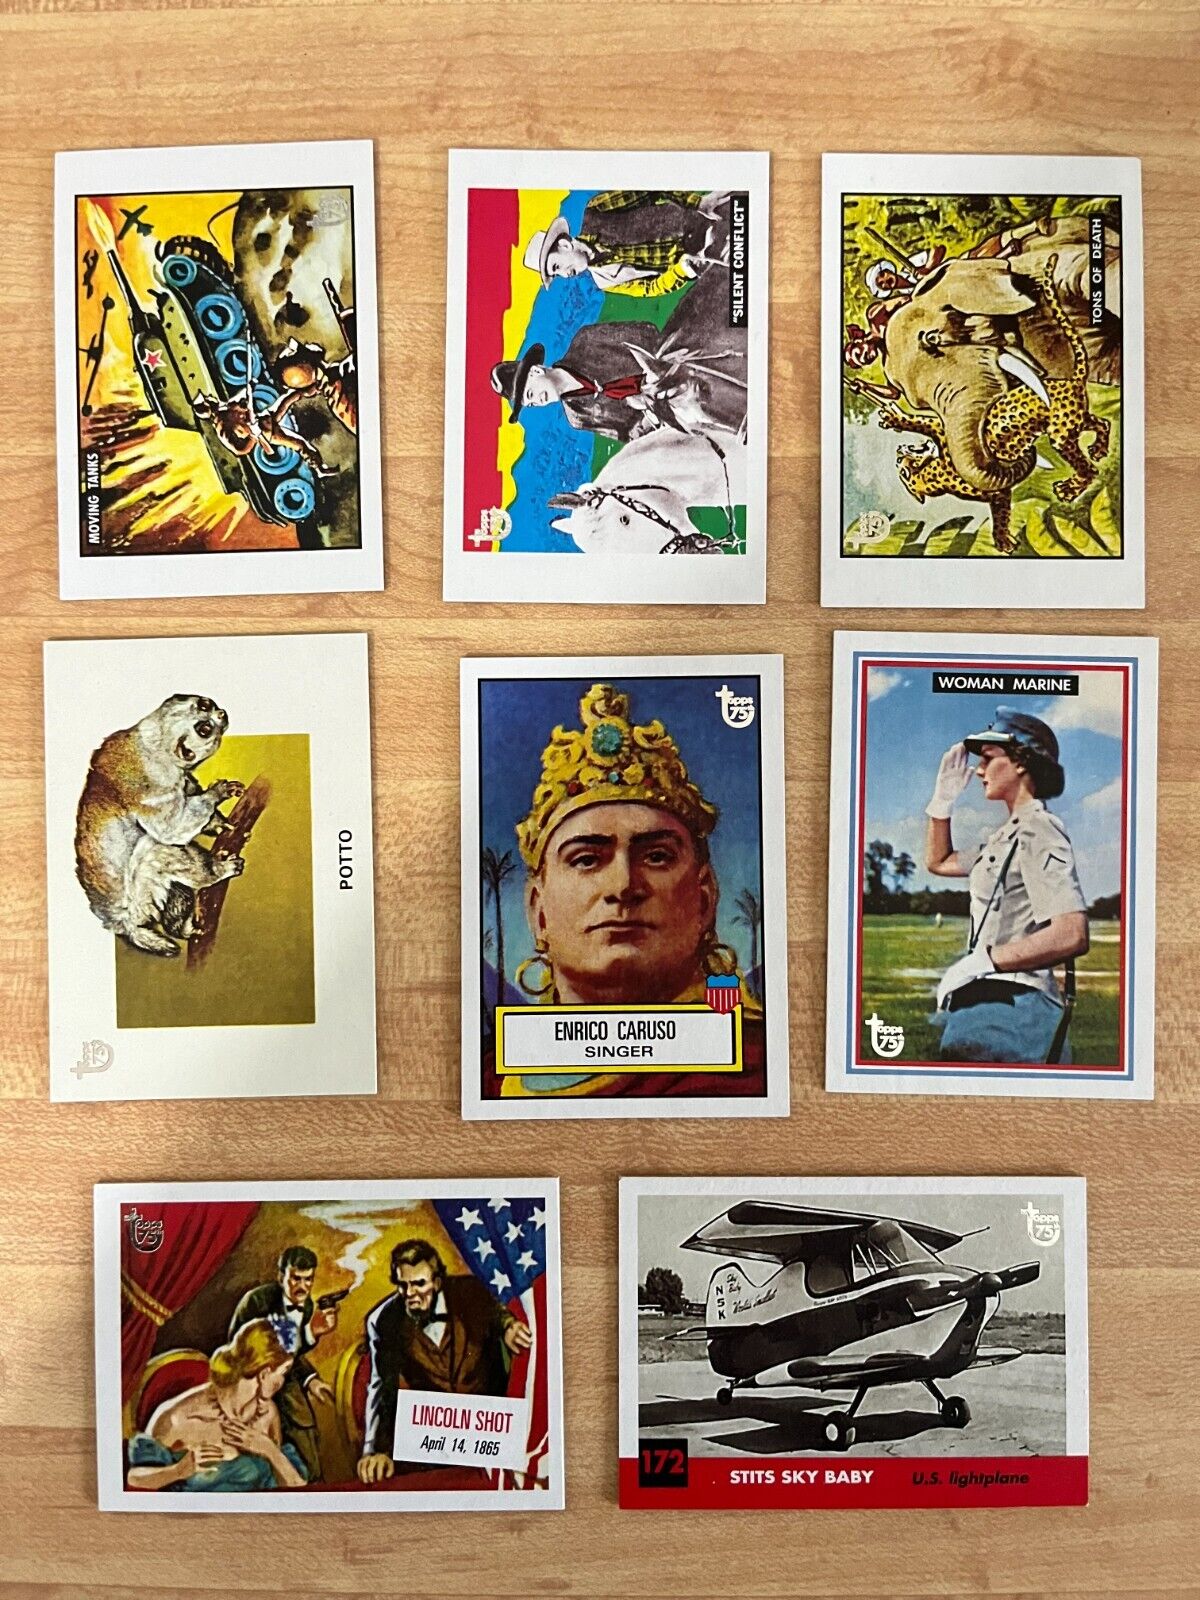 2013 Topps 75th Anniversary Complete Mini Card Inset Set 8 cards NrMt